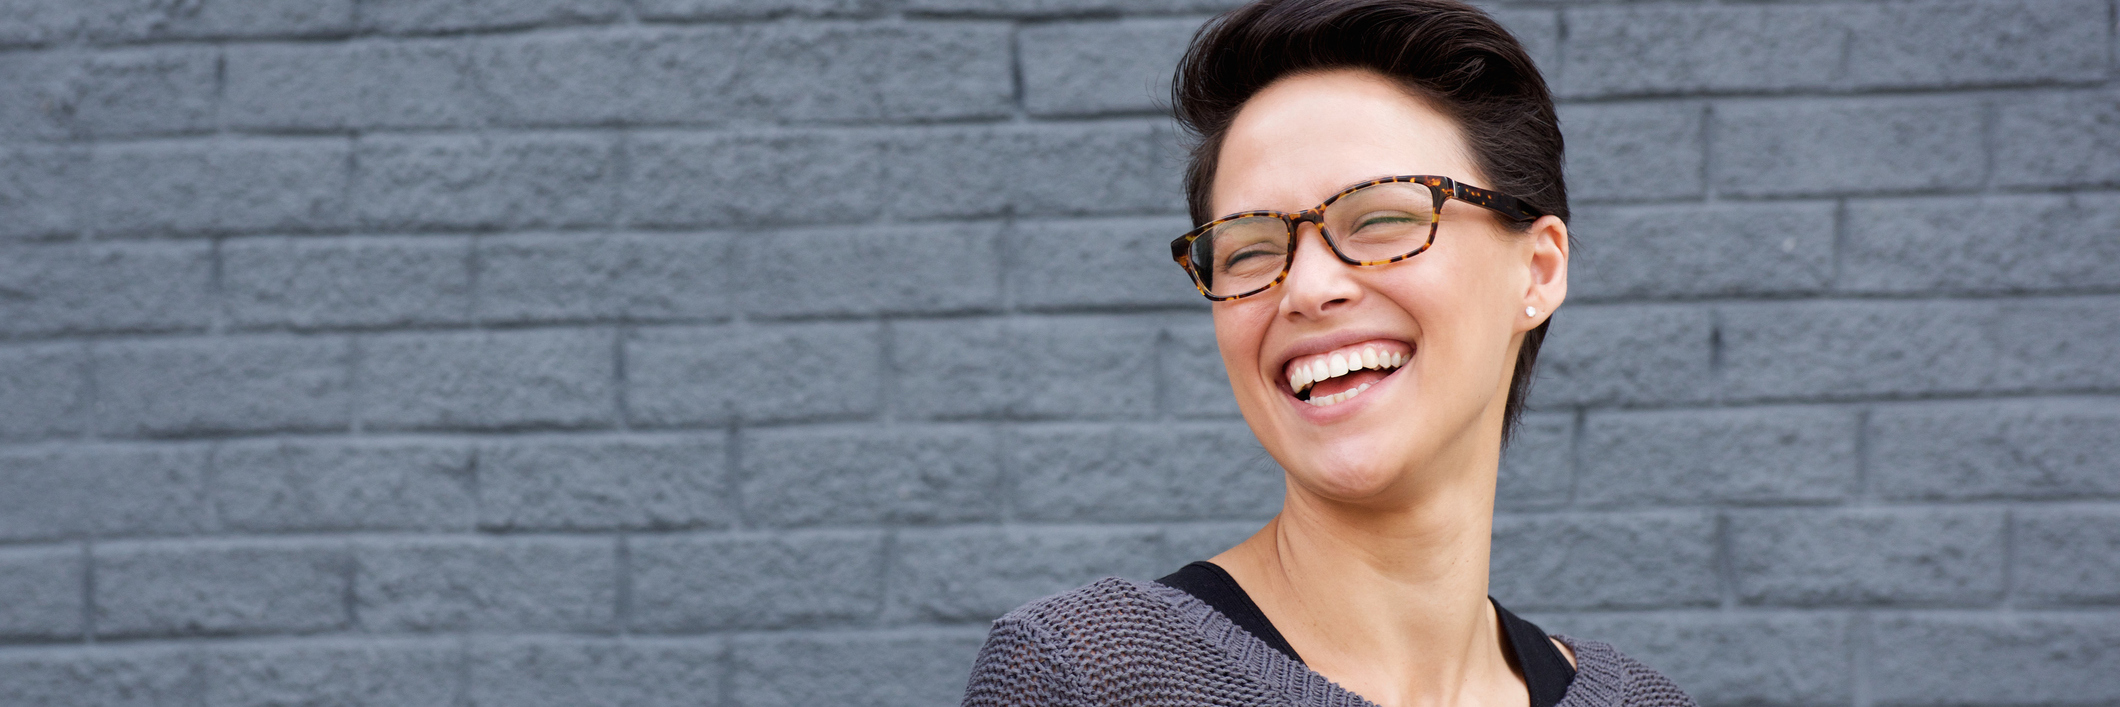 woman with glasses laughing in front of a gray wall